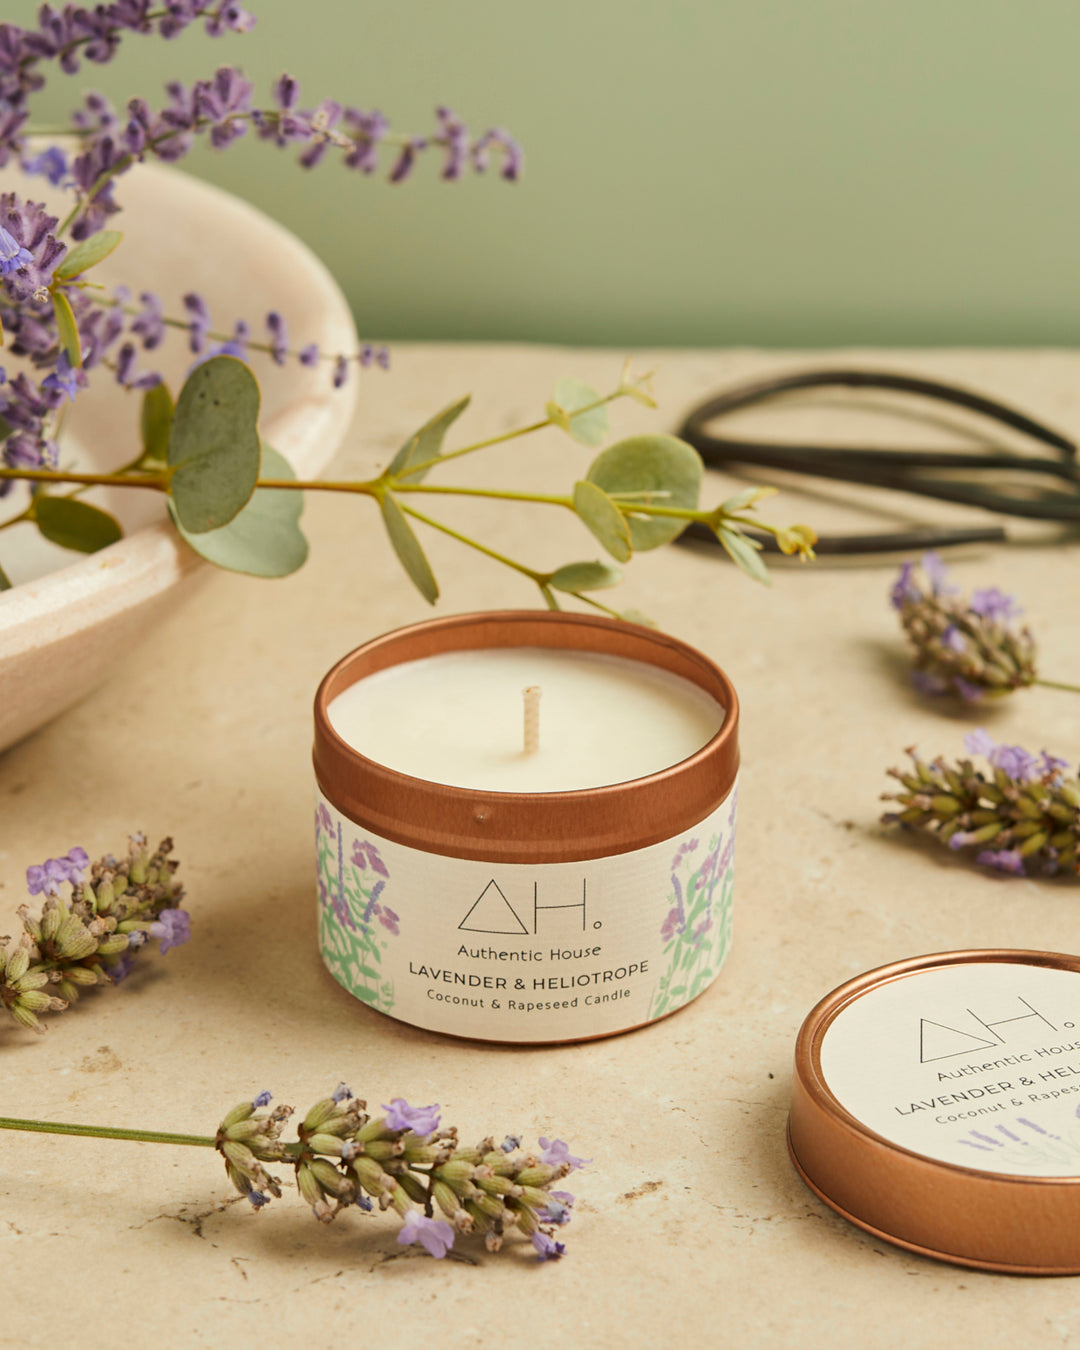 Lavender & heliotrope coconut rapeseed candle with lavender and eucalyptus stems